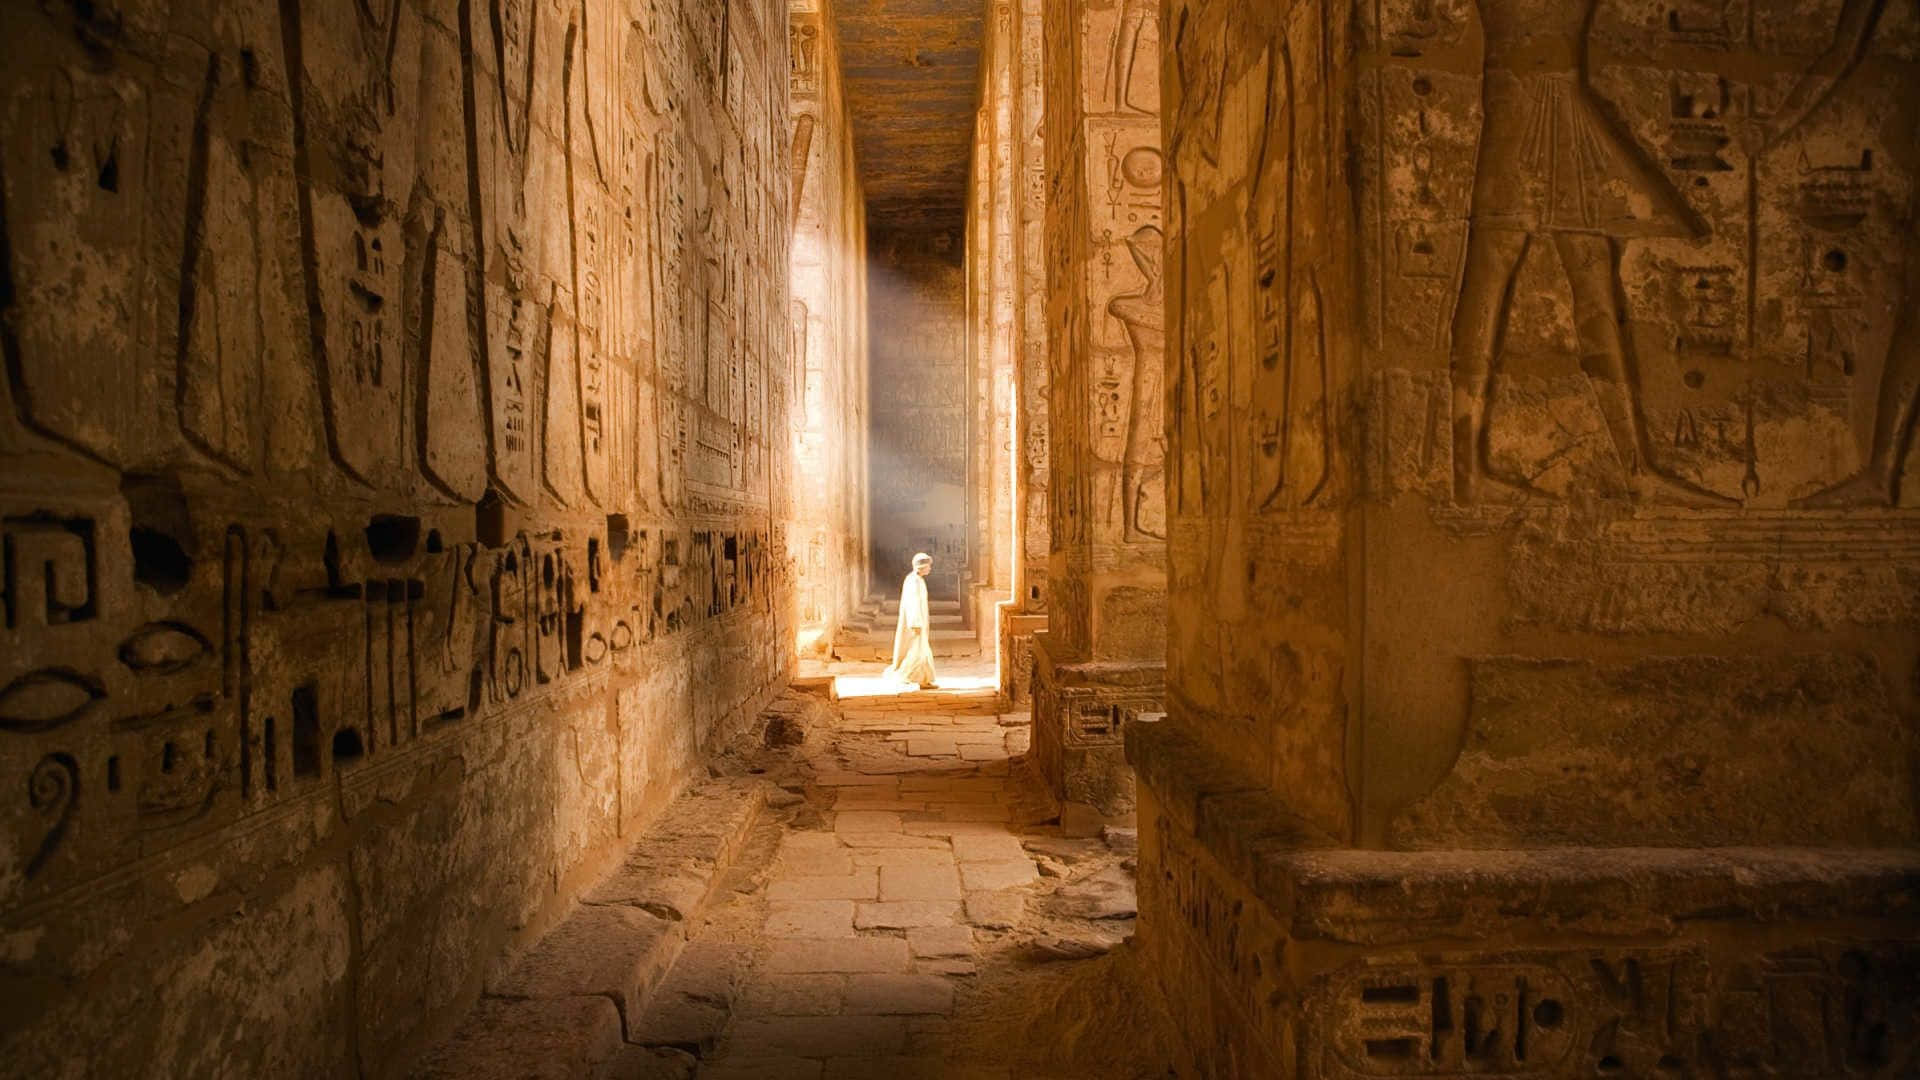 A Man Is Walking Down A Narrow Hallway In An Ancient Egyptian Temple